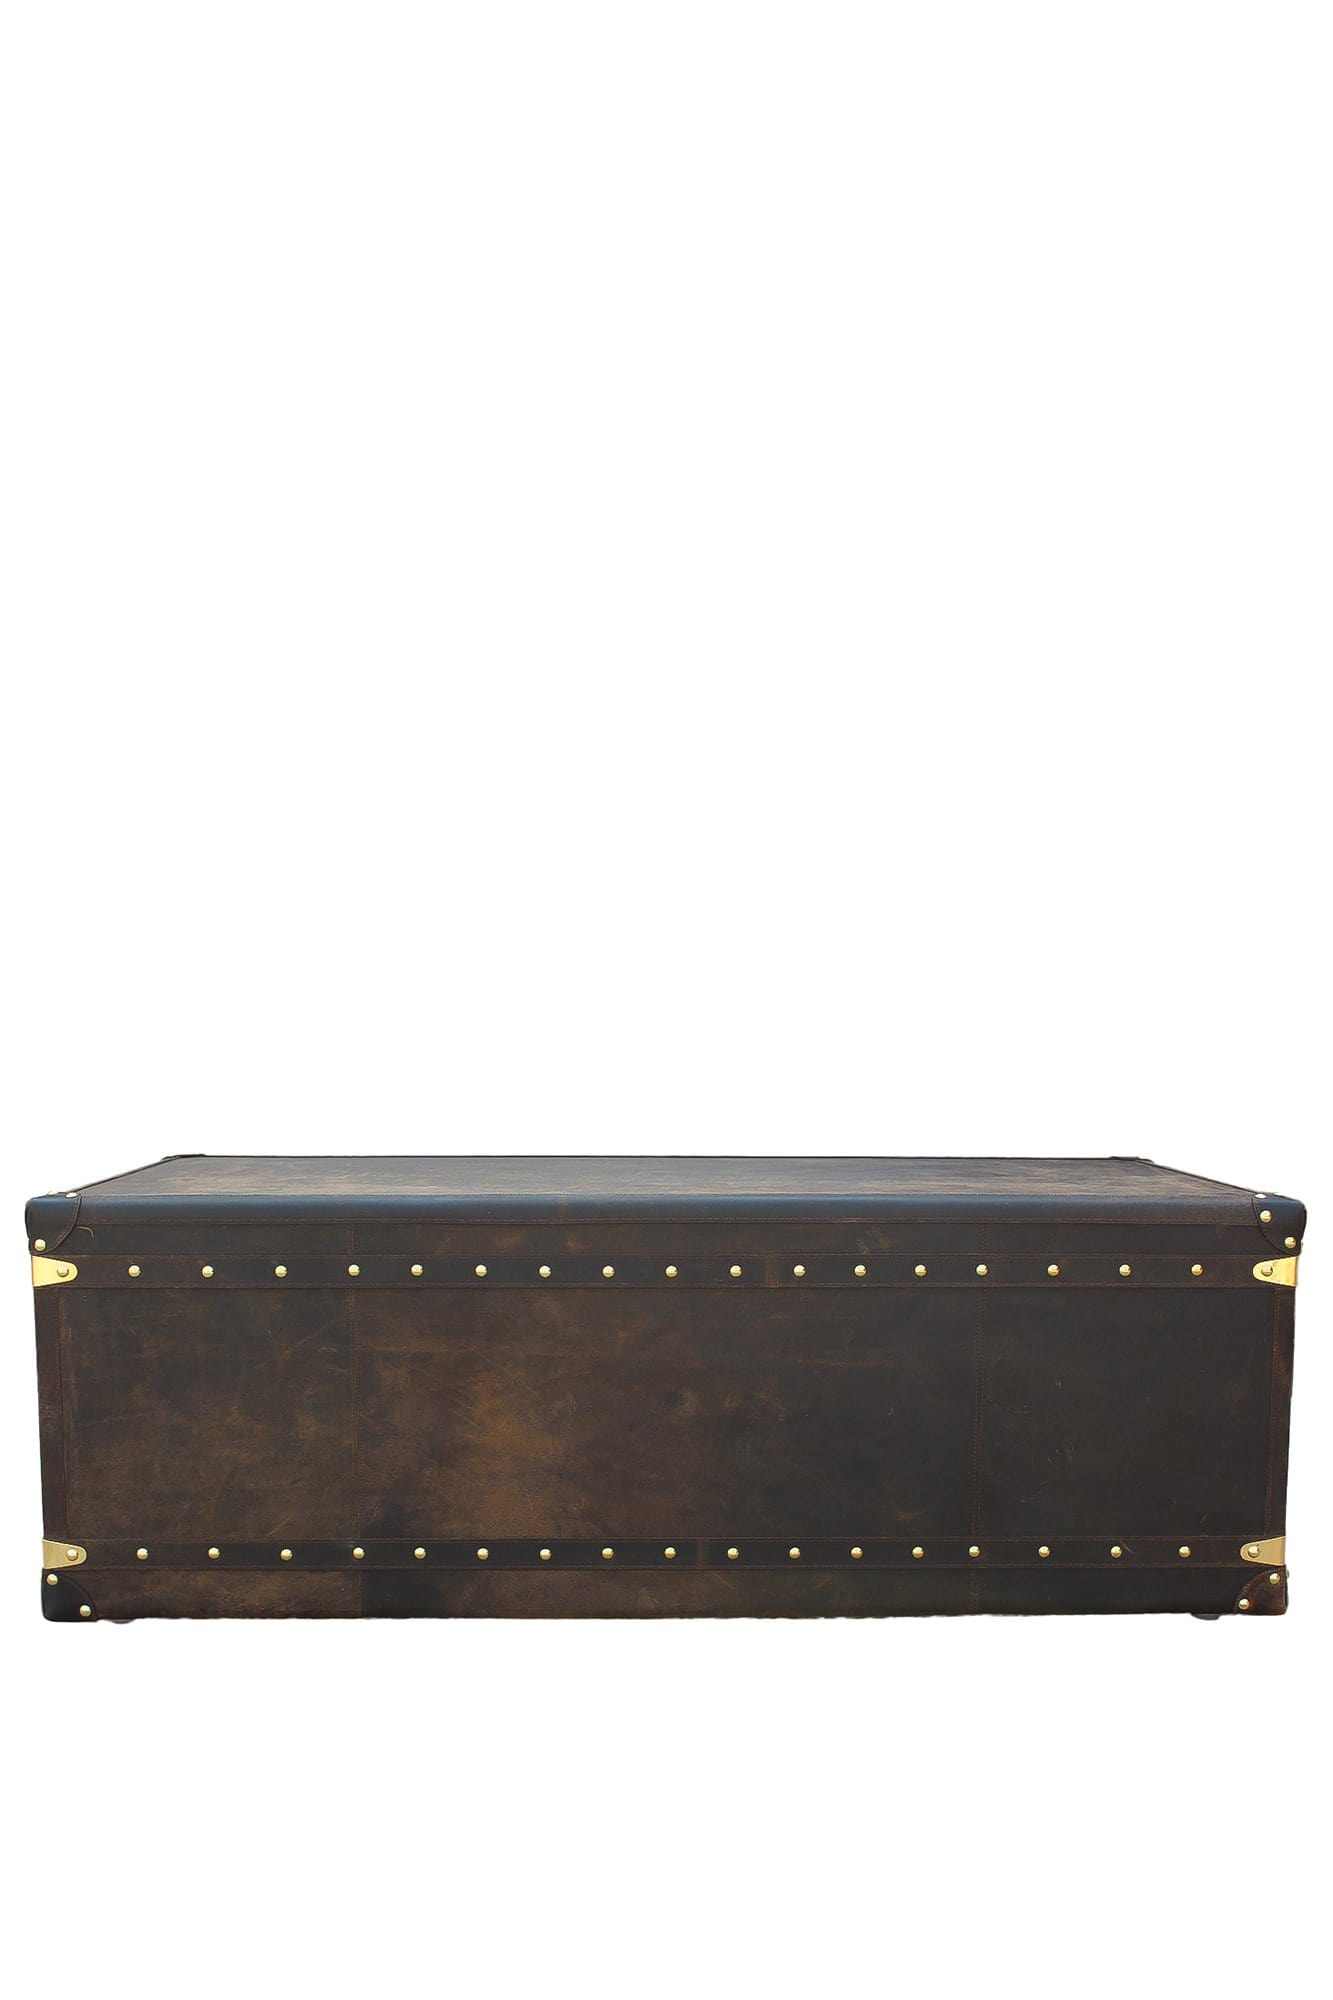 VINTAGE COFFEE TABLE IN LEATHER WITH TWO DRAWERS - ART AVENUE